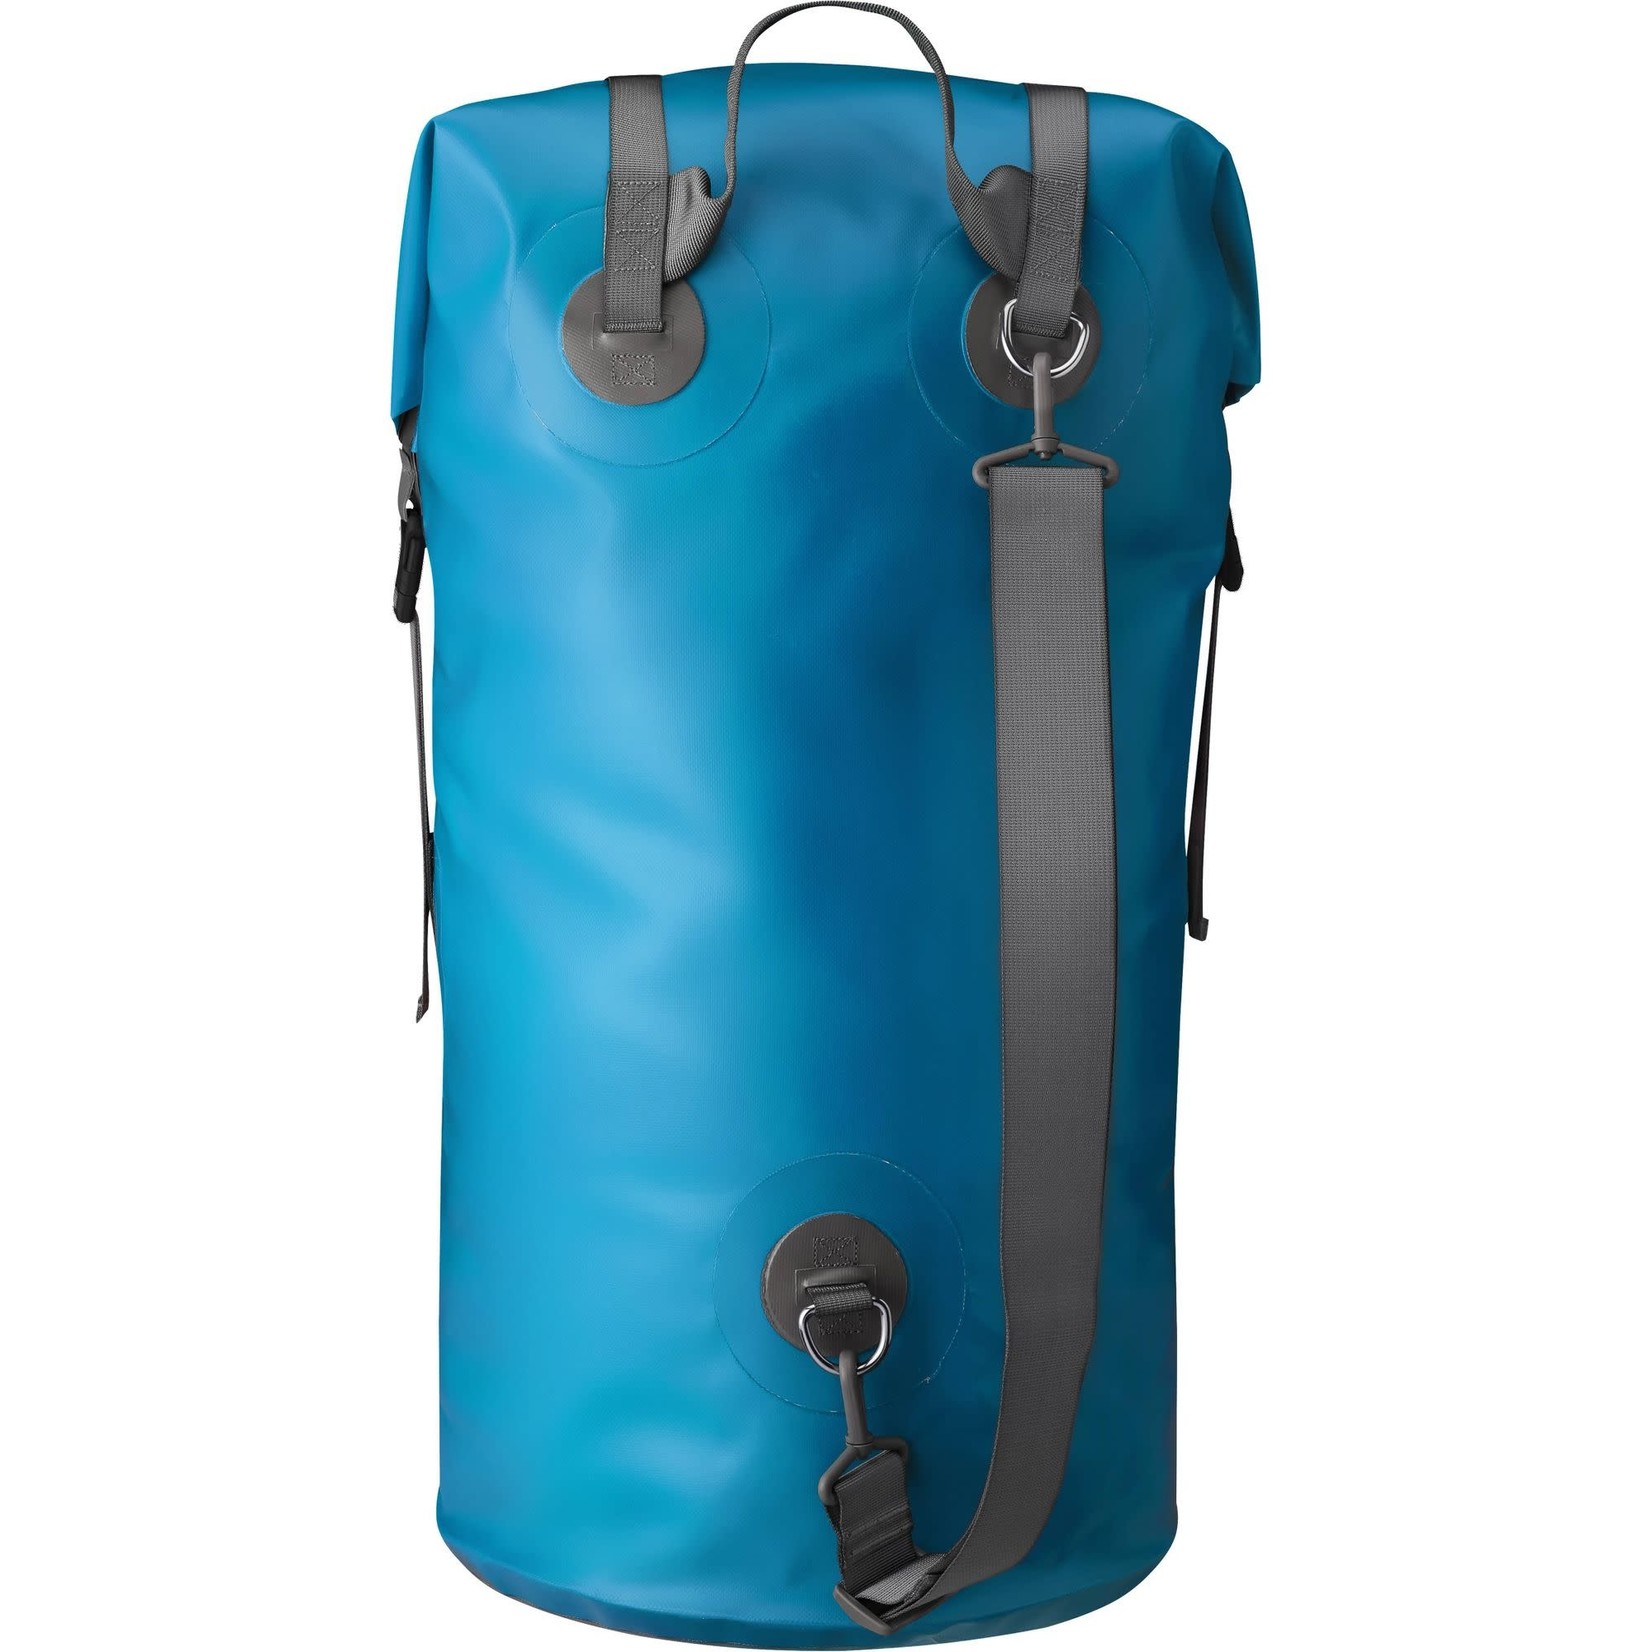 NRS NRS Outfitter Dry Bag Blue 65L